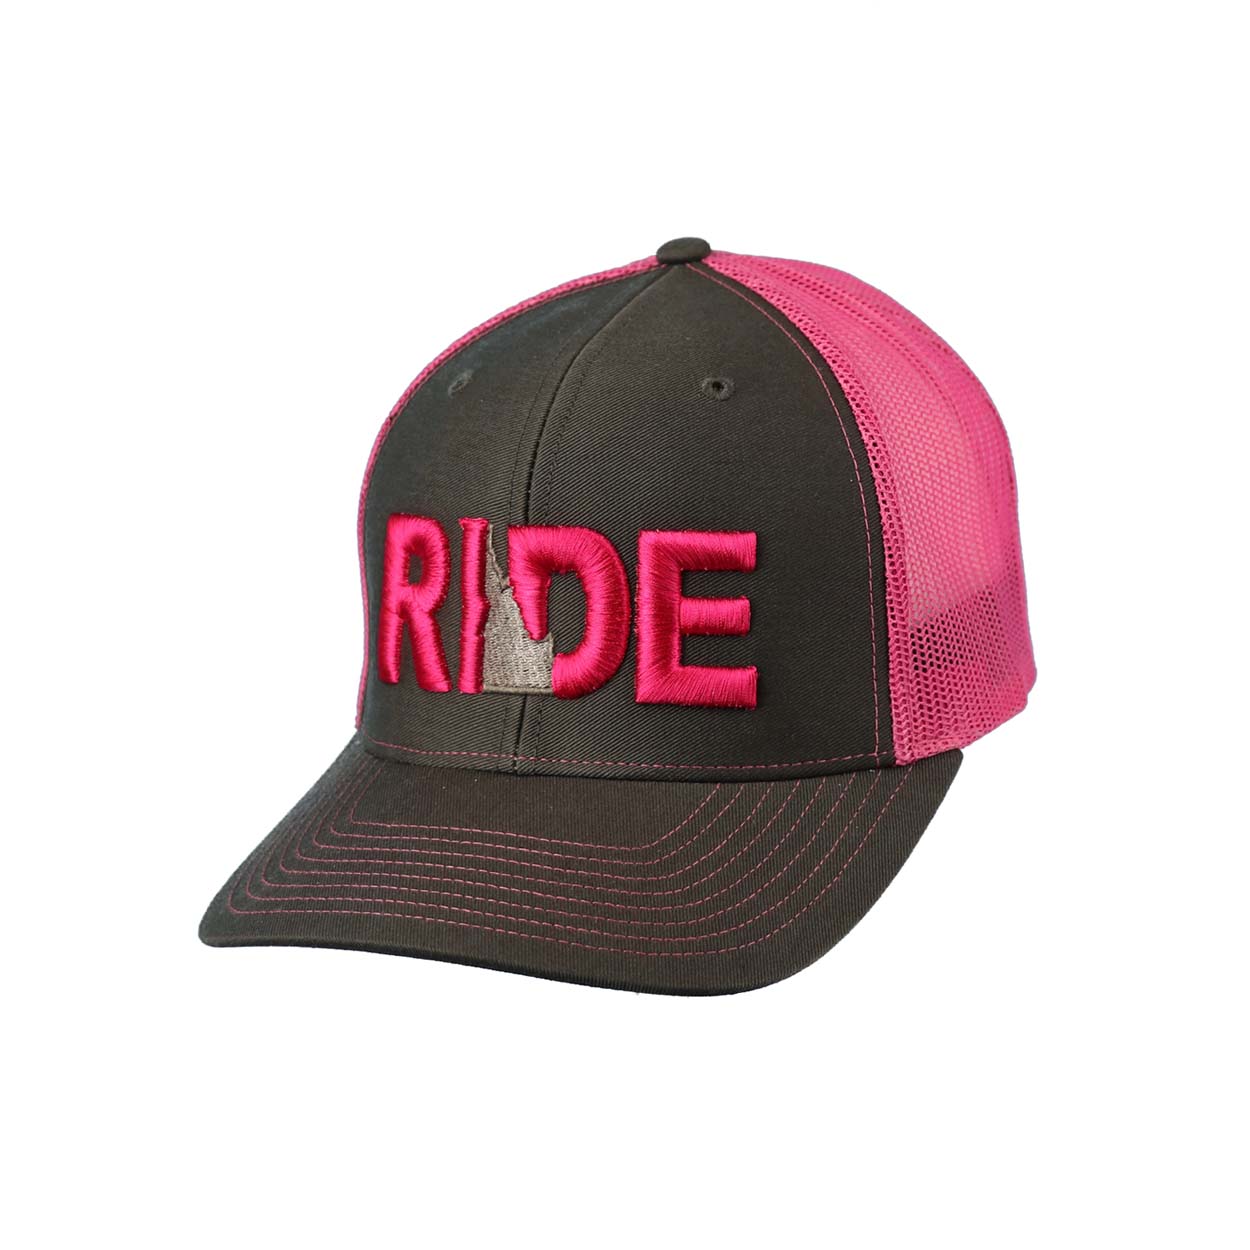 Ride Idaho Classic Pro 3D Puff Embroidered Snapback Trucker Hat Gray/Pink